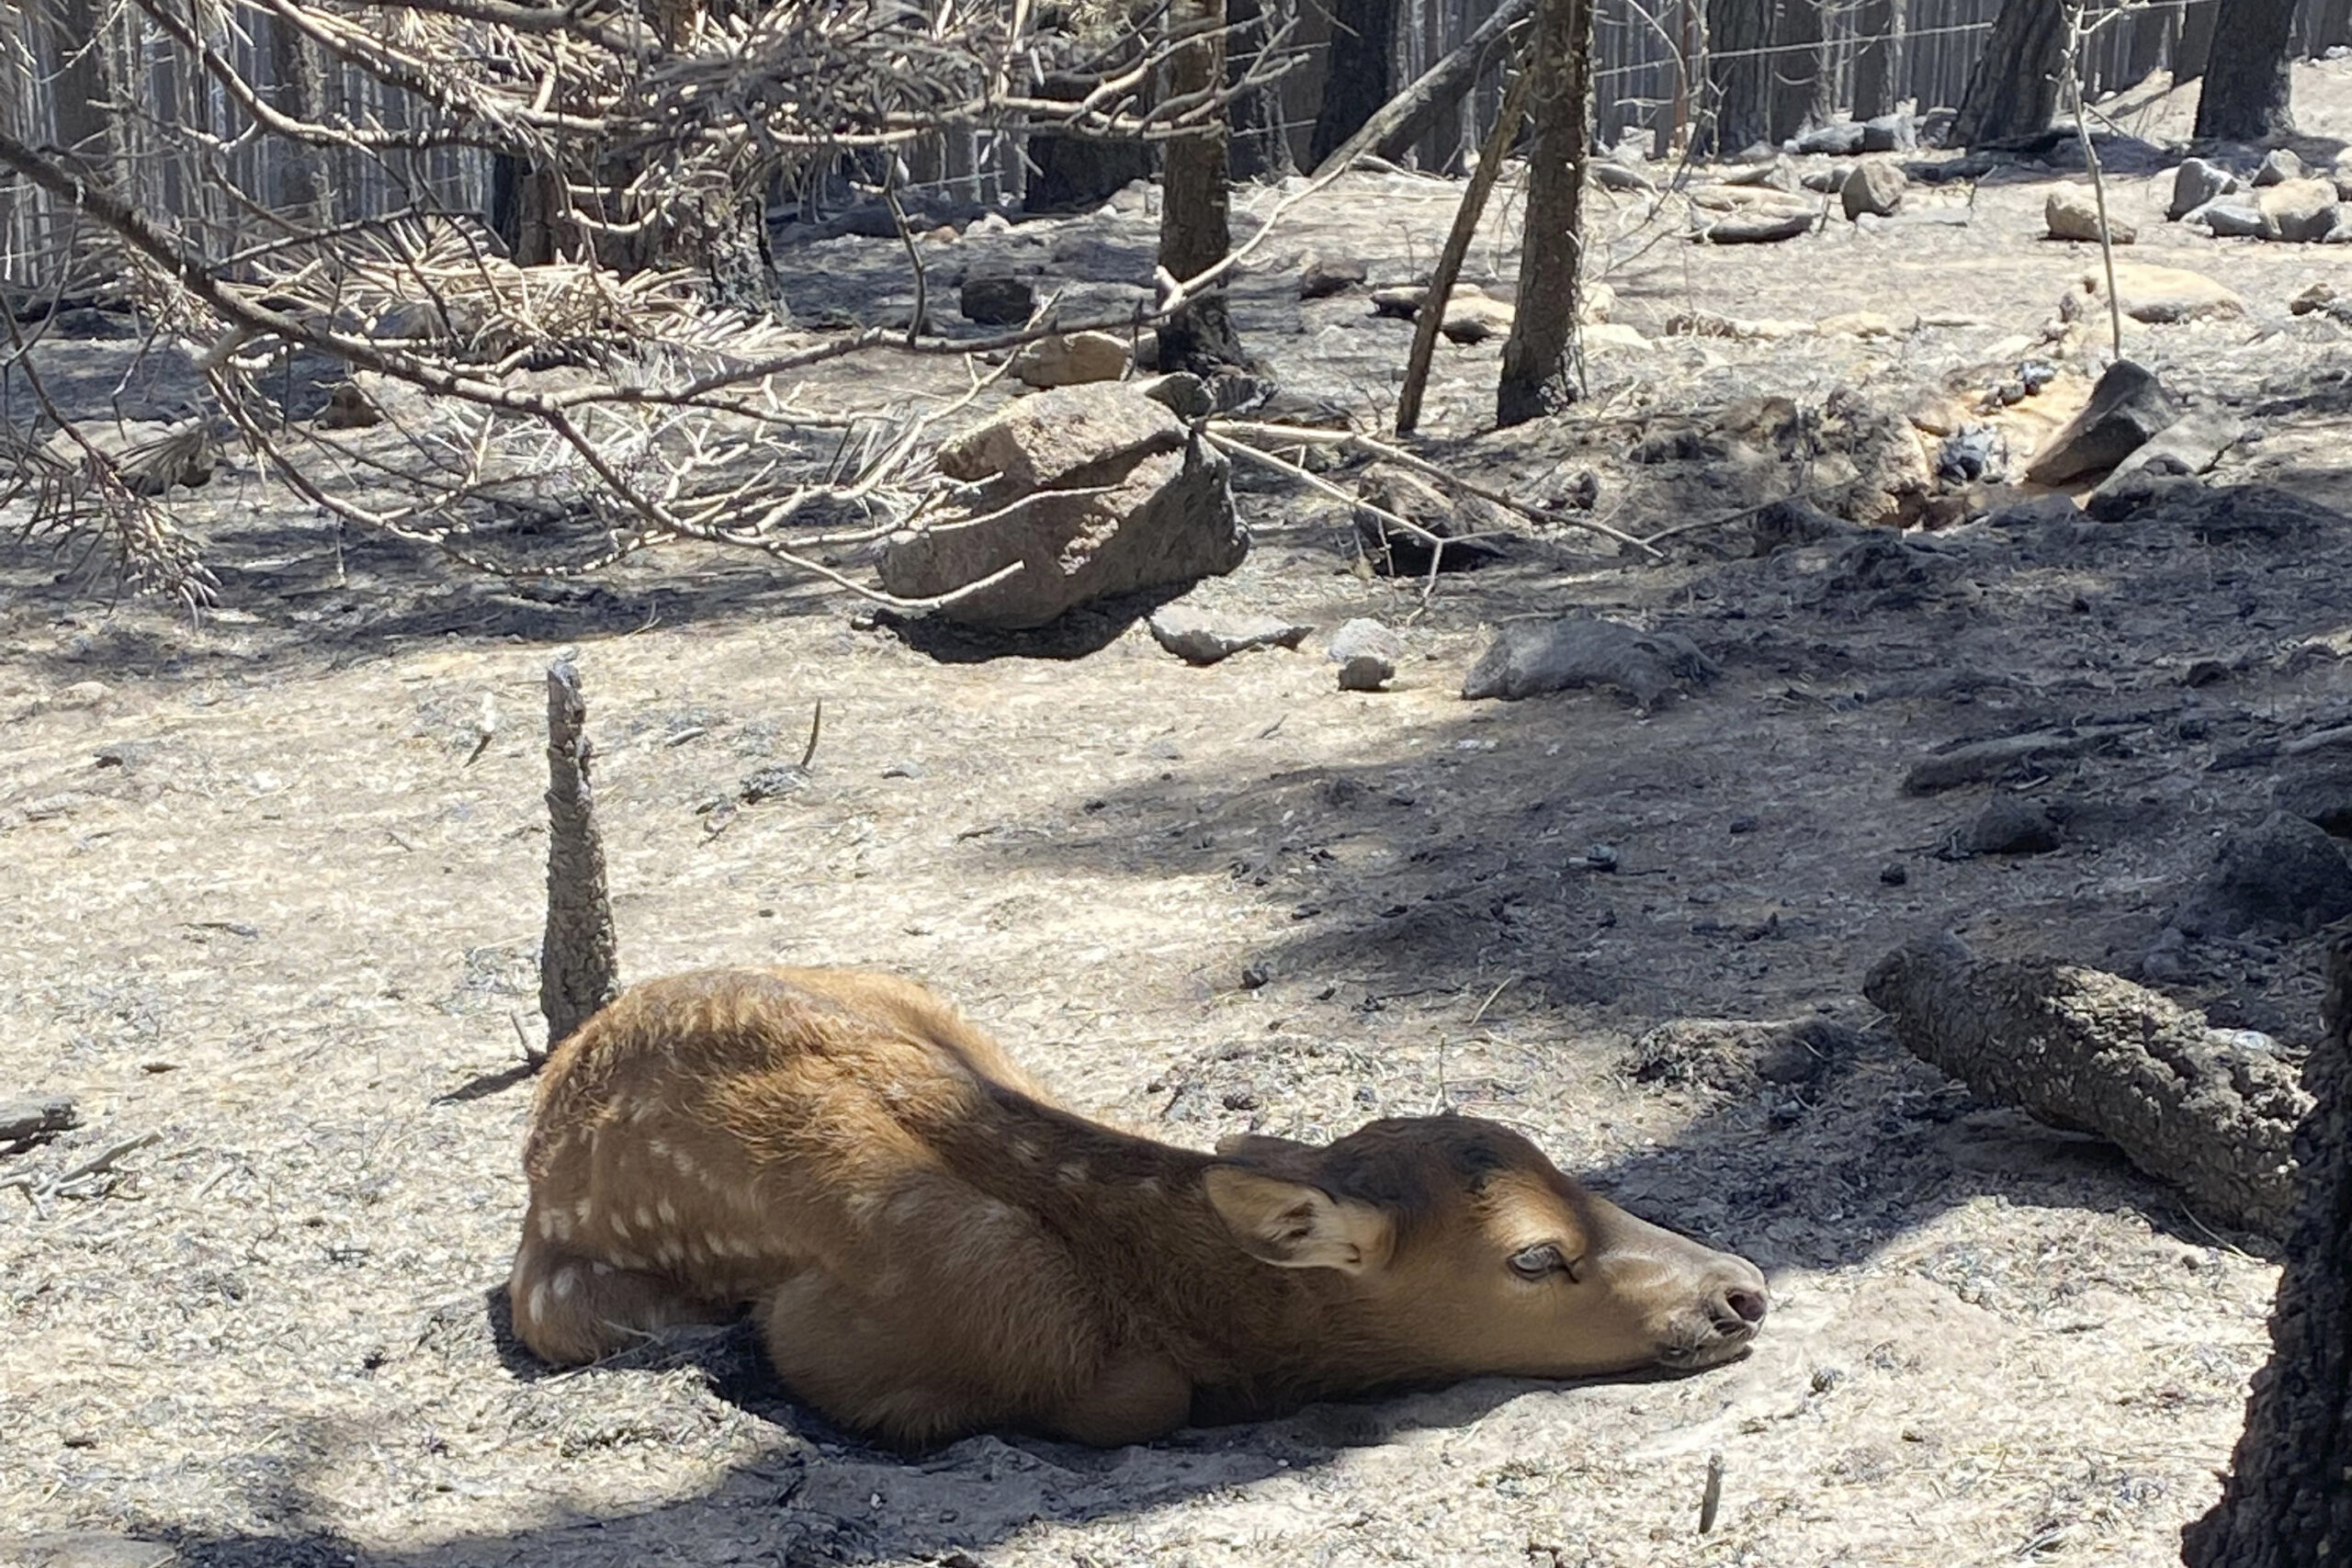 In this photo provided by Nate Sink, a newborn elk calf rests alone in a remote, fire-scarred area of the Sangre de Cristo Mountains near Mora, N.M., on Saturday, May 21, 2022. Sink says he saw no signs of the calf's mother and helped transport the baby bull to a wildlife rehabilitation center to be raised alongside a surrogate gown elk. (Nate Sink via AP)